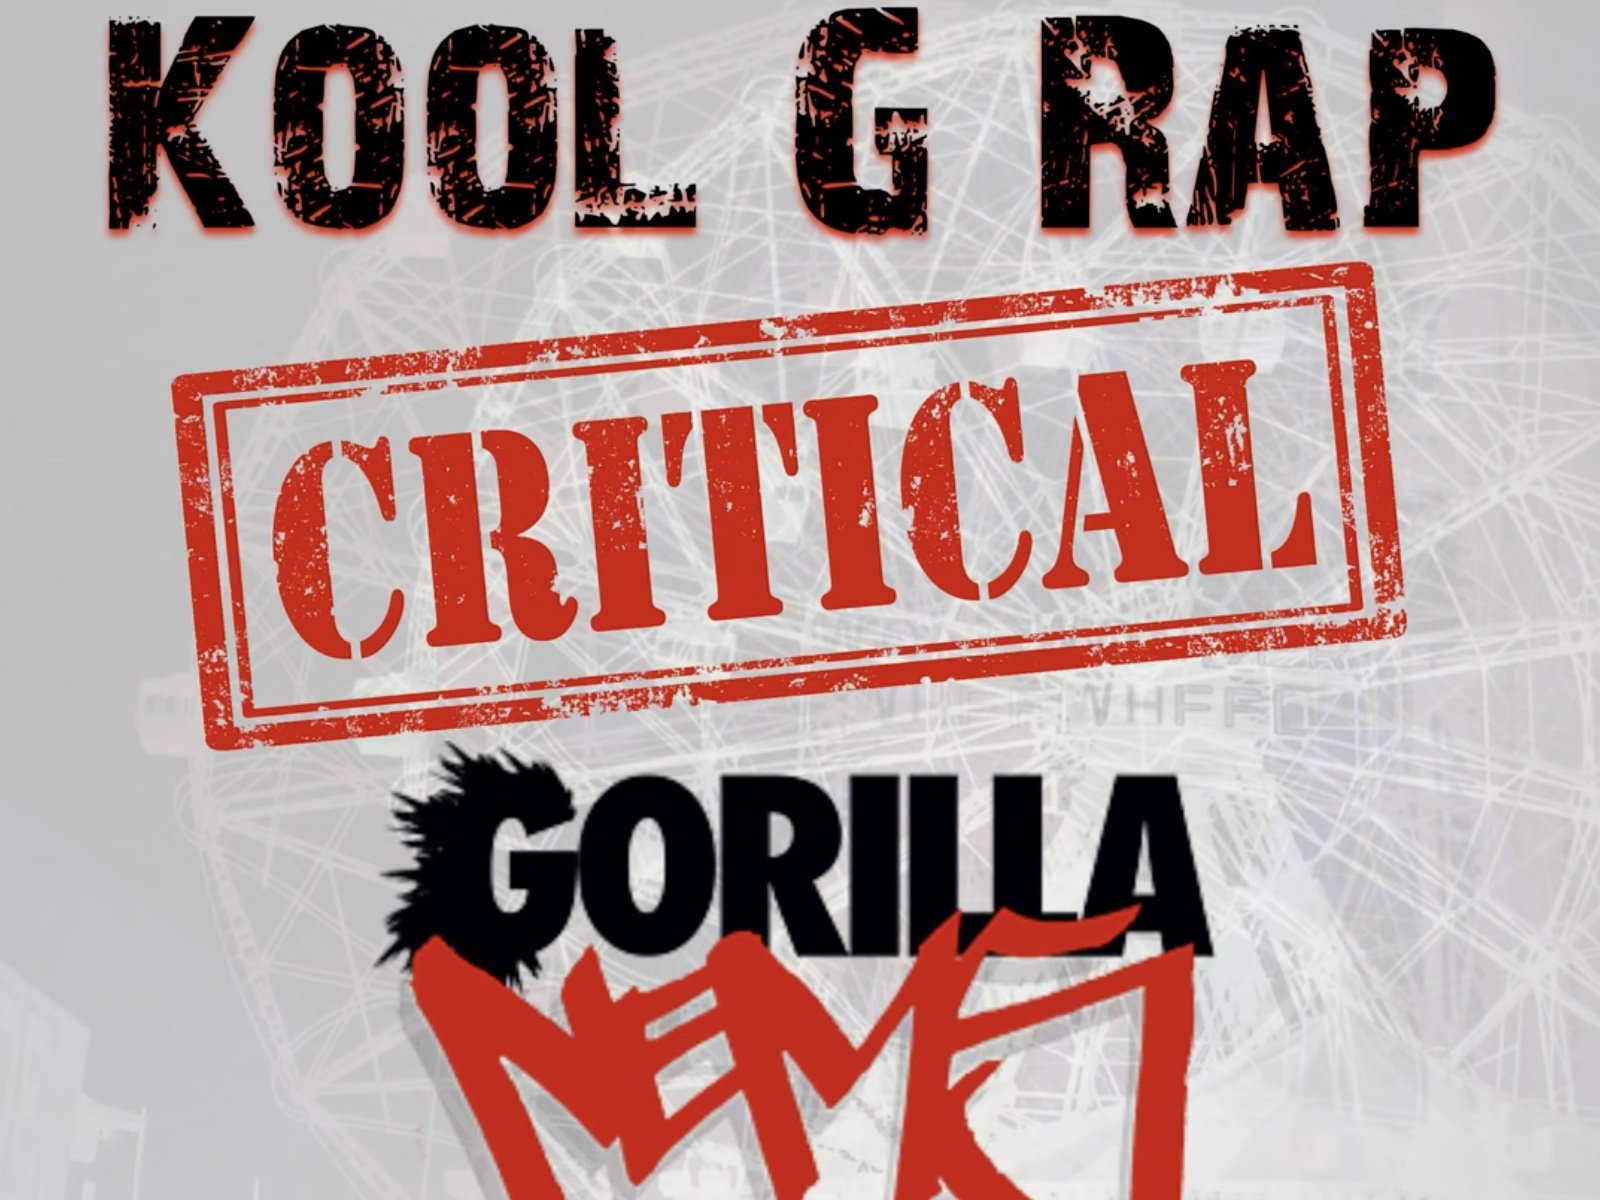 Kool G Rap is back-back with a new album and 'Critical' song with